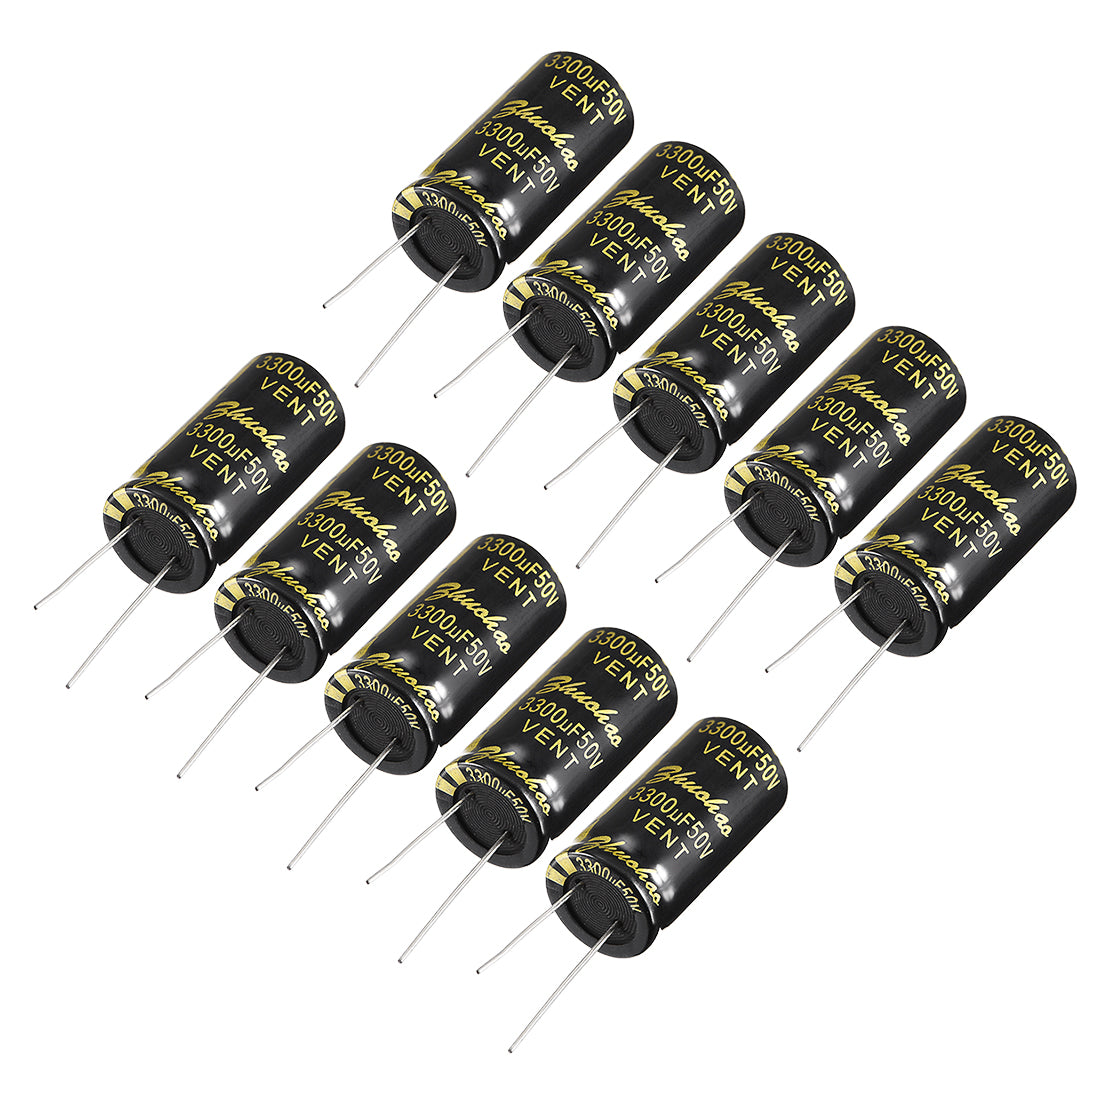 uxcell Uxcell Aluminum Radial Electrolytic Capacitor with 3300uF 50V 105 Celsius Life 2000H 18 x 36 mm Black 10pcs